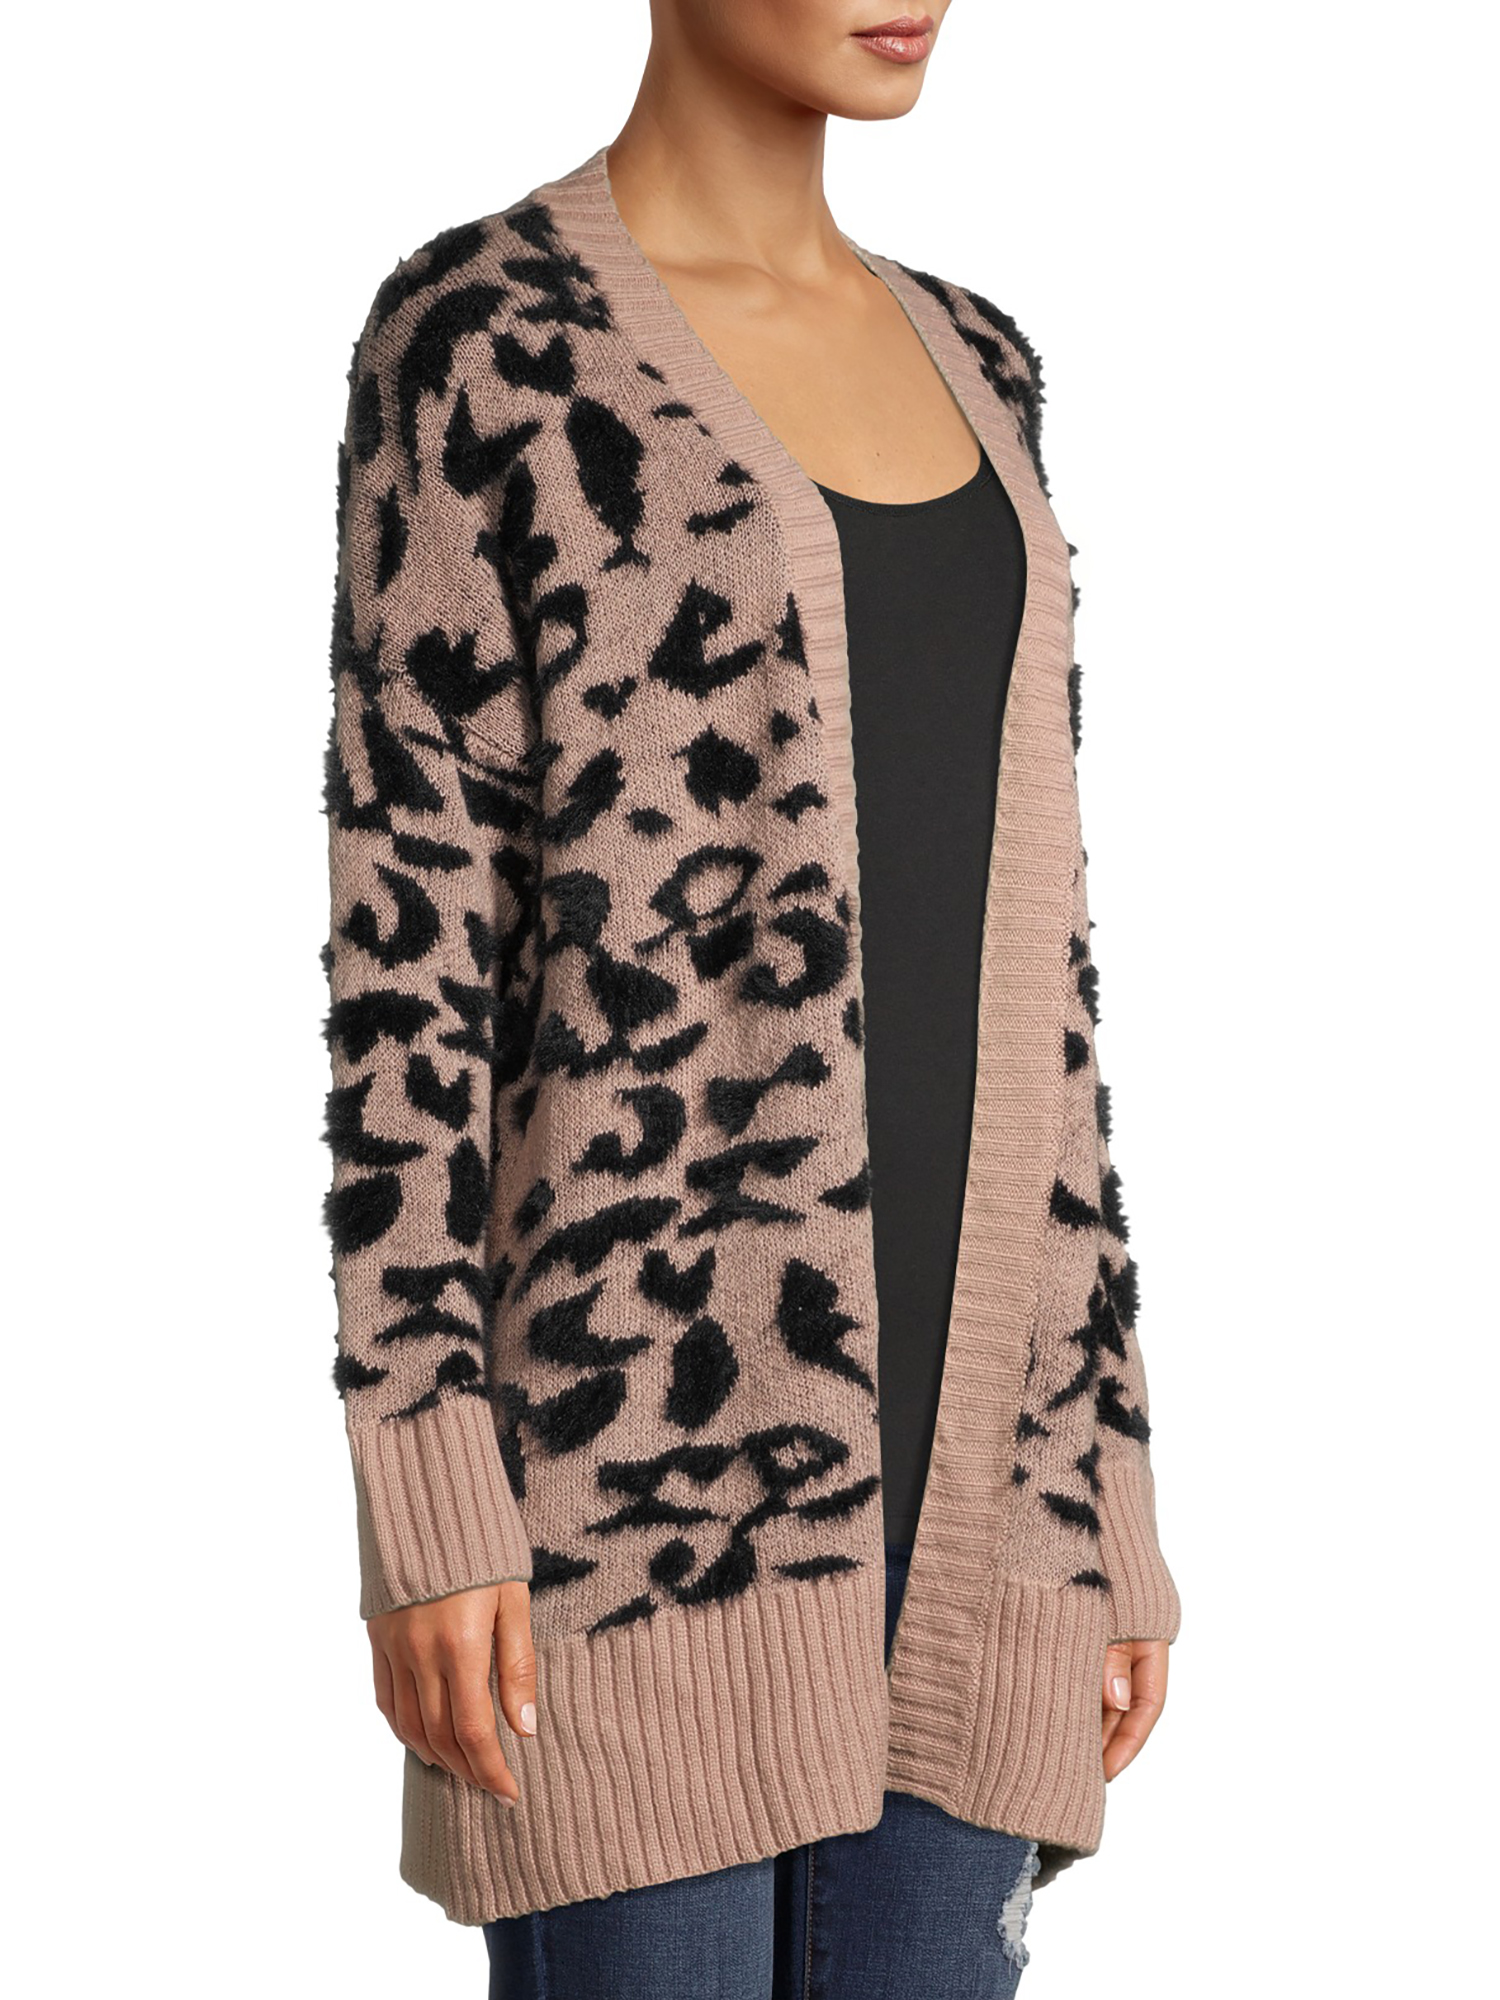 Dreamers by Debut Women's Open Front Cardigan Sweater, Midweight, Sizes XS-XL - image 2 of 6